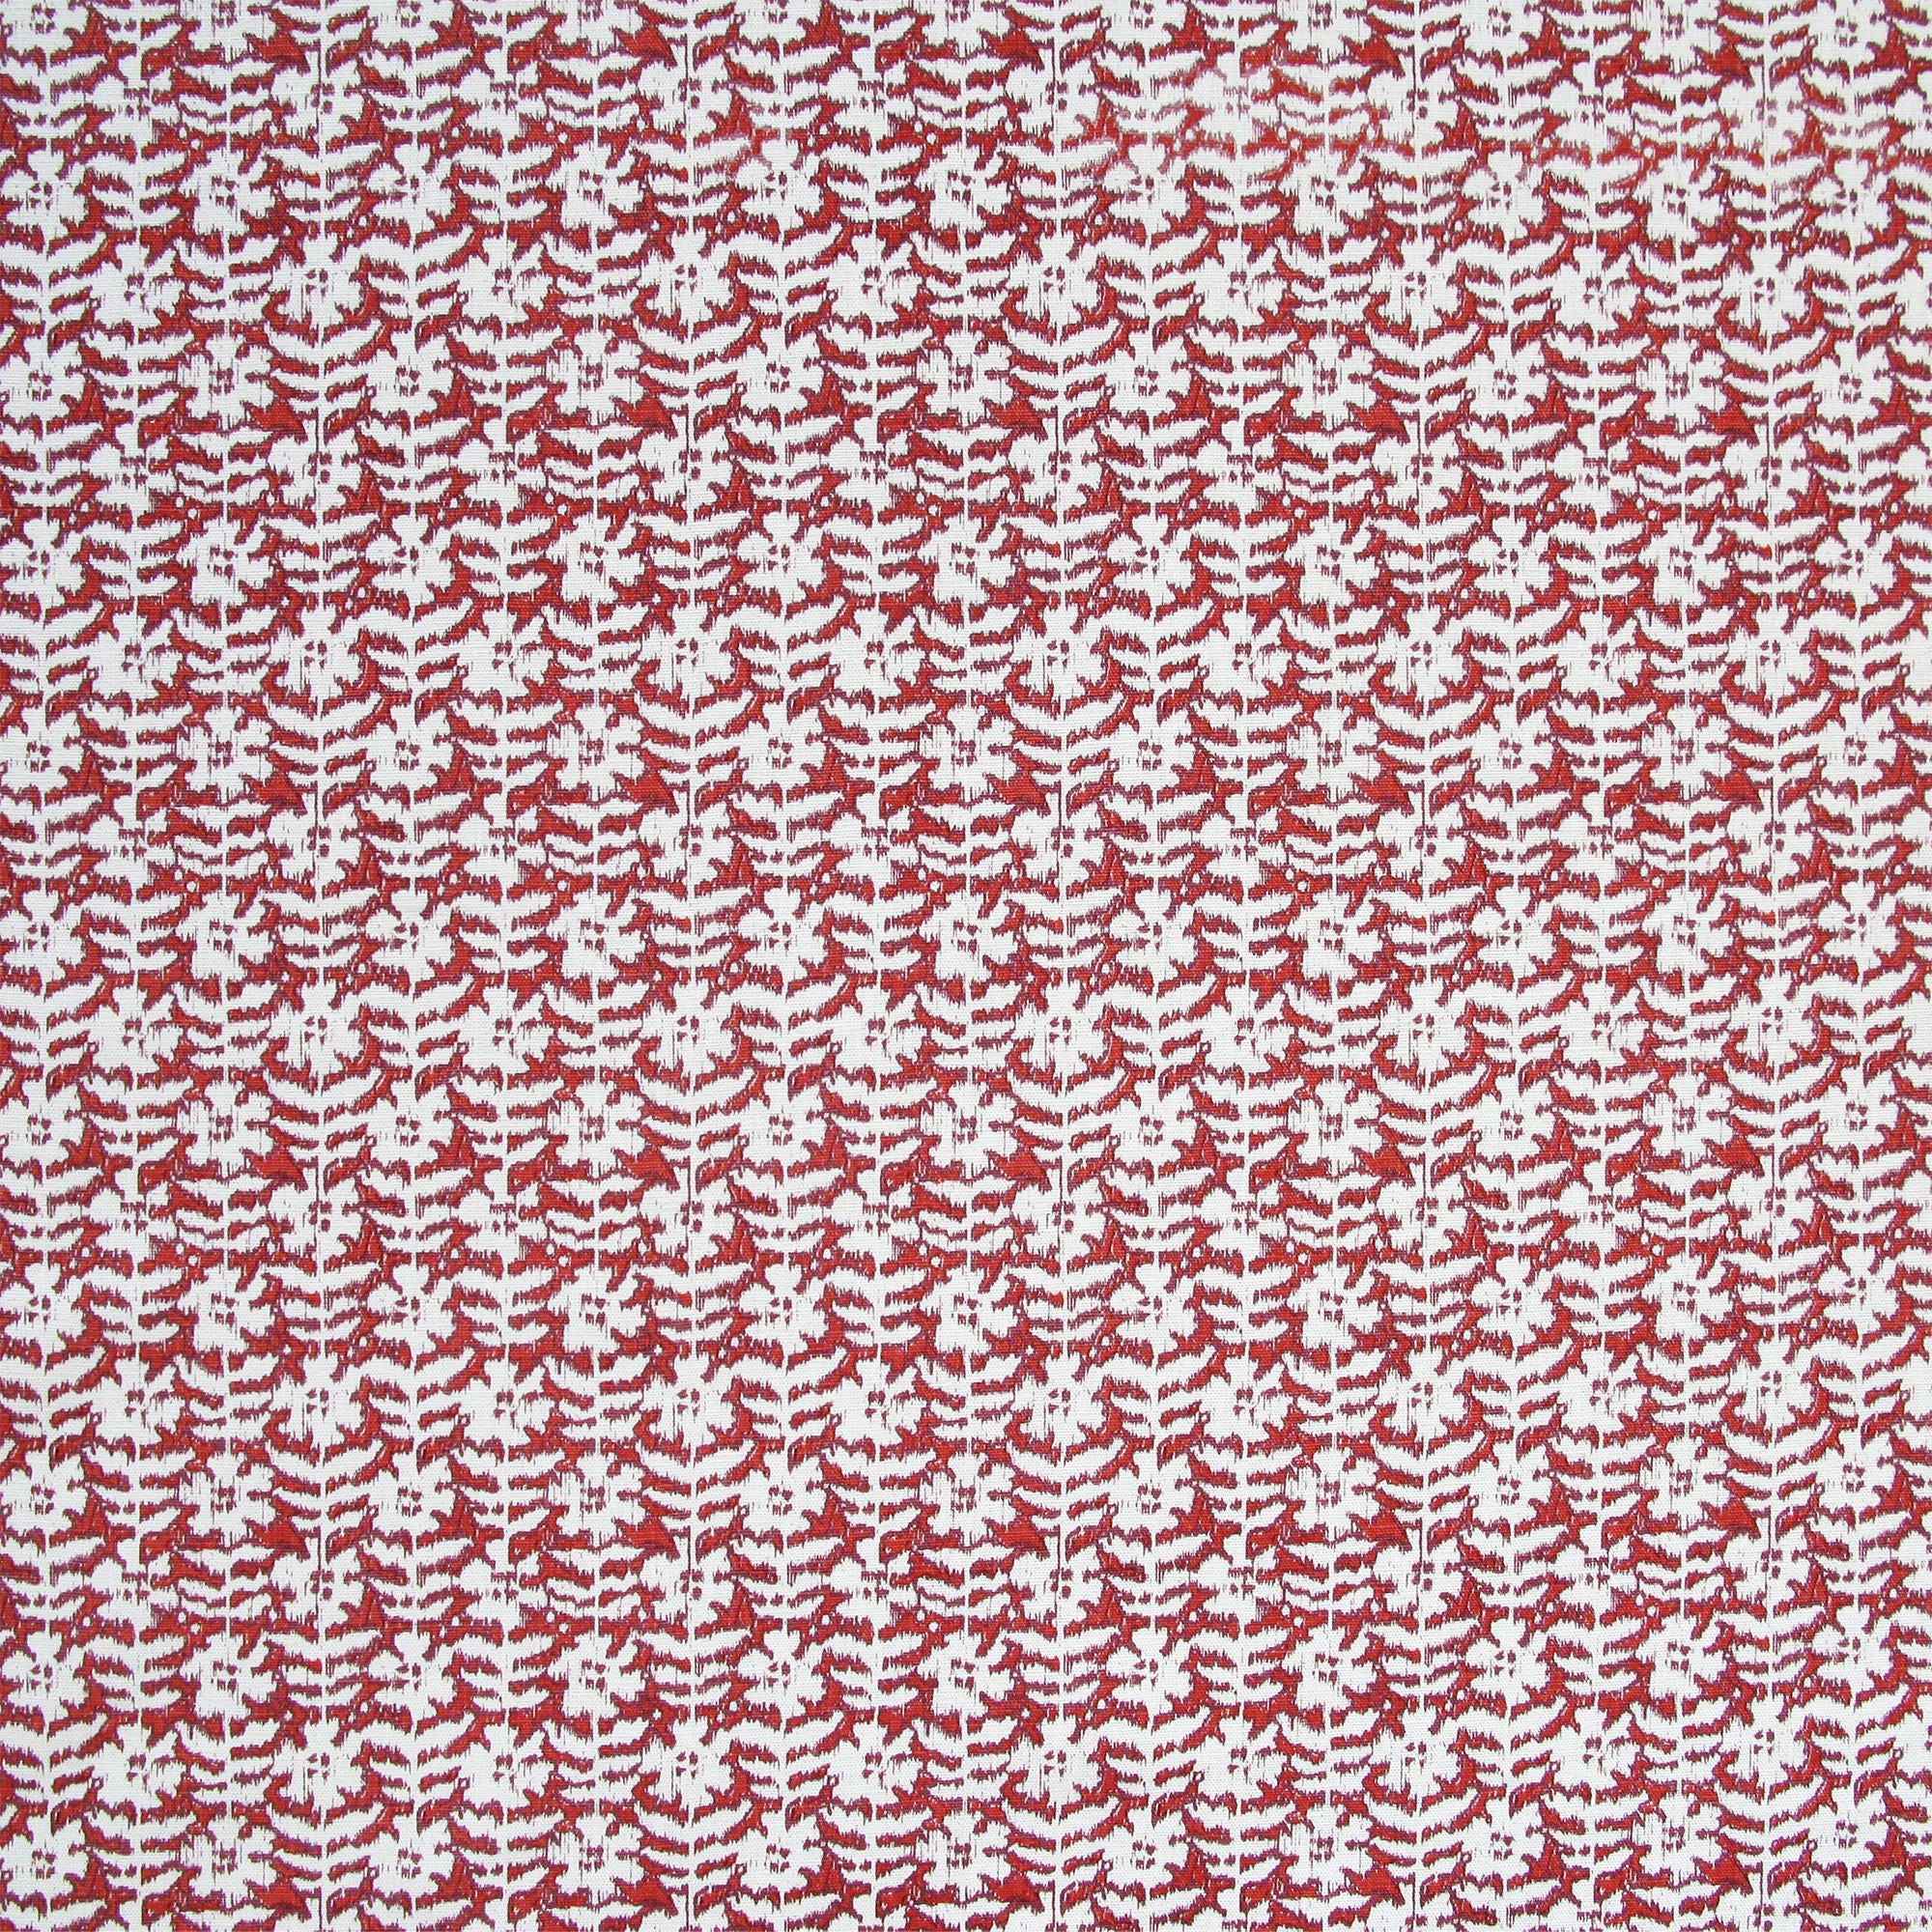 Detail of fabric in a floral grid print in white and maroon on a red field.